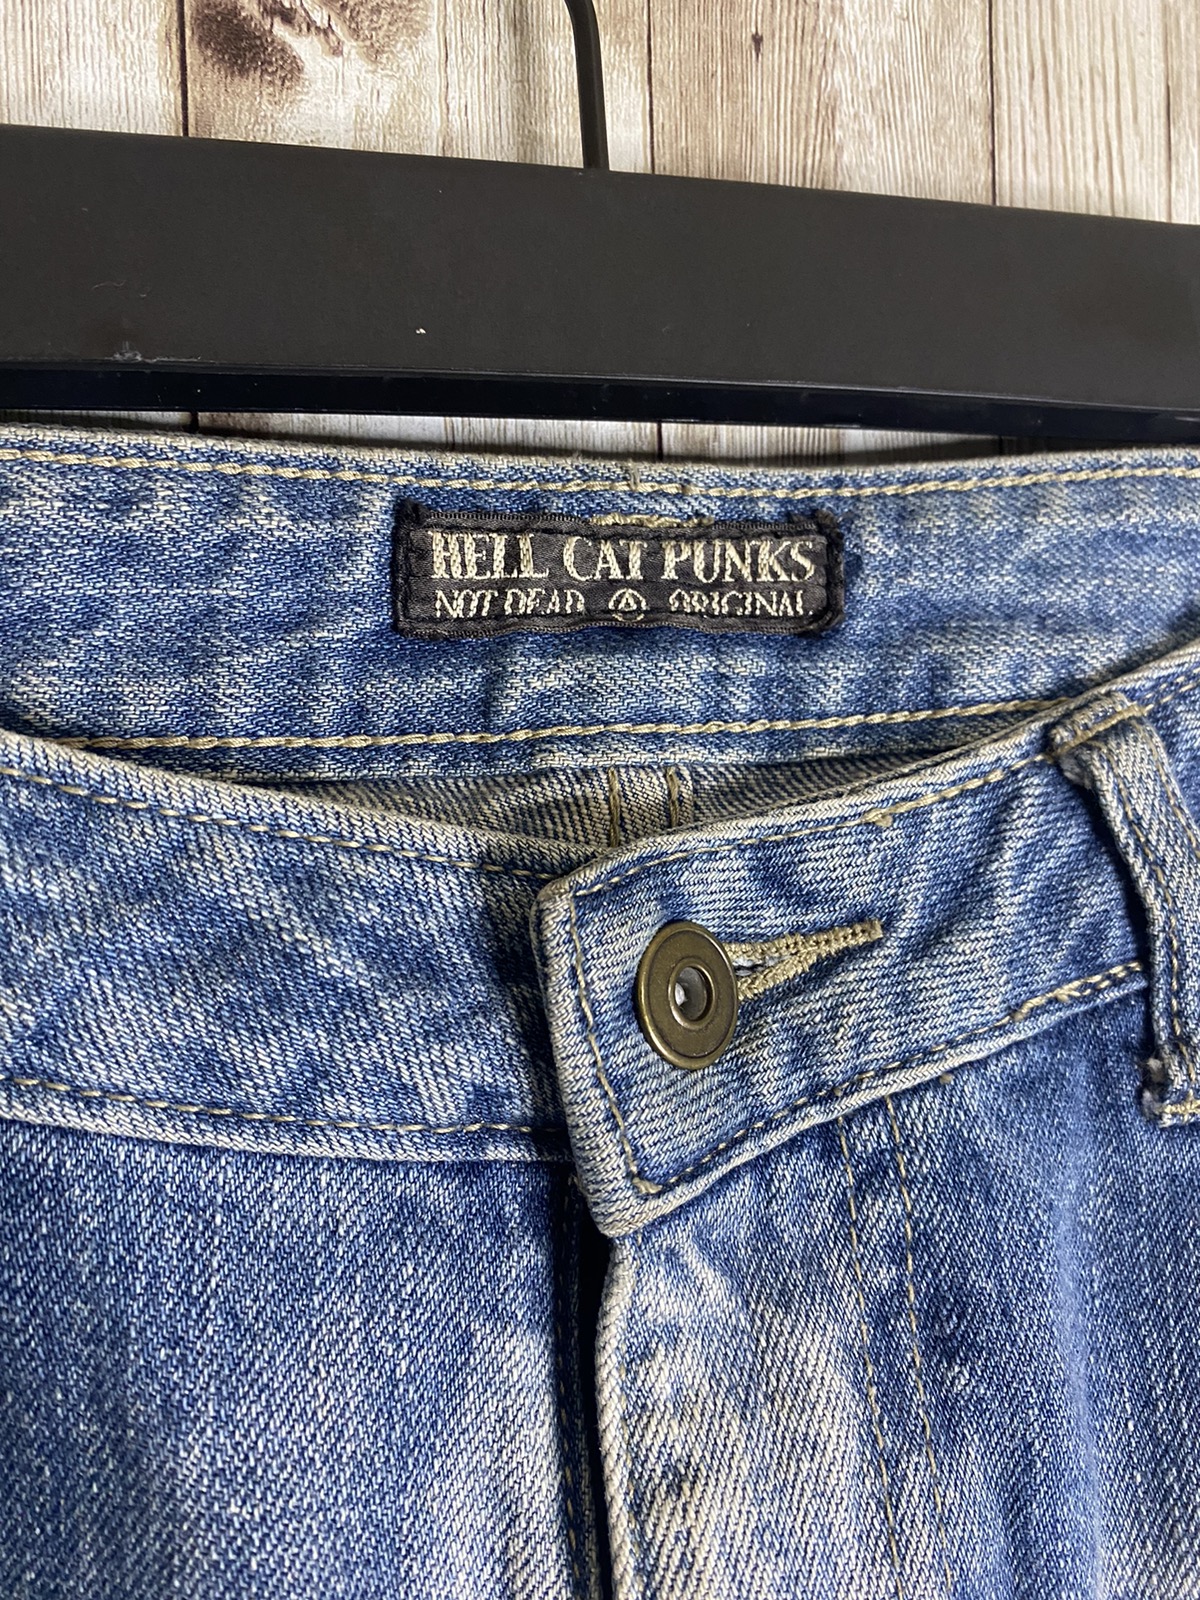 Japanese Brand - Seditionaries Hell Cat Punks Jeans - 5